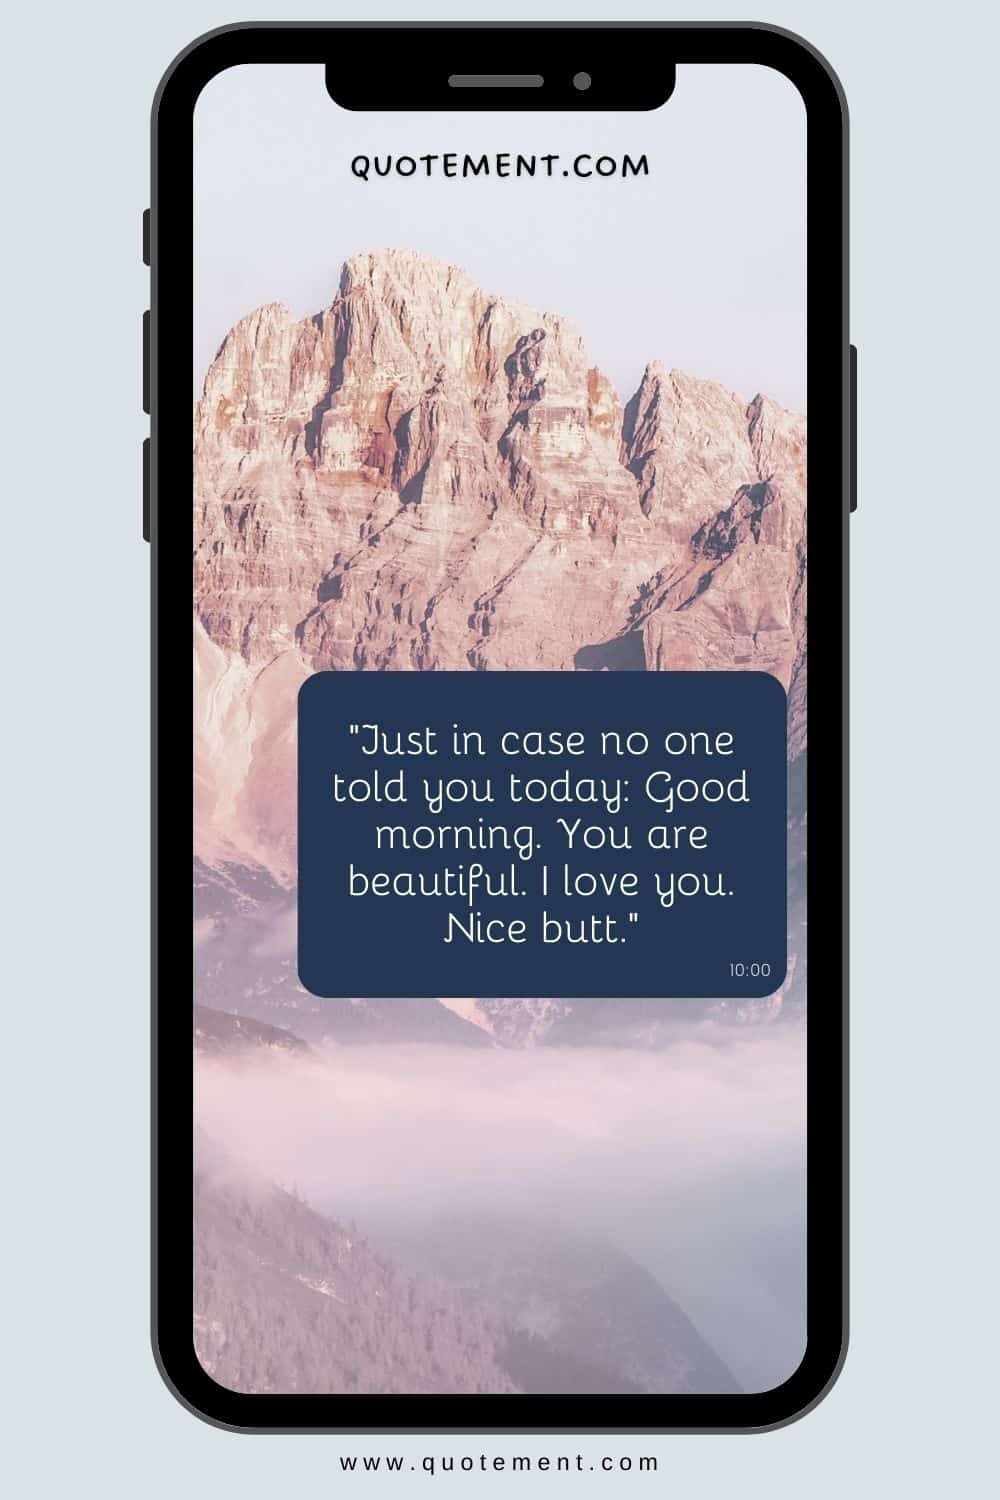 message notification in a black pop-up box on a mountain-themed screen